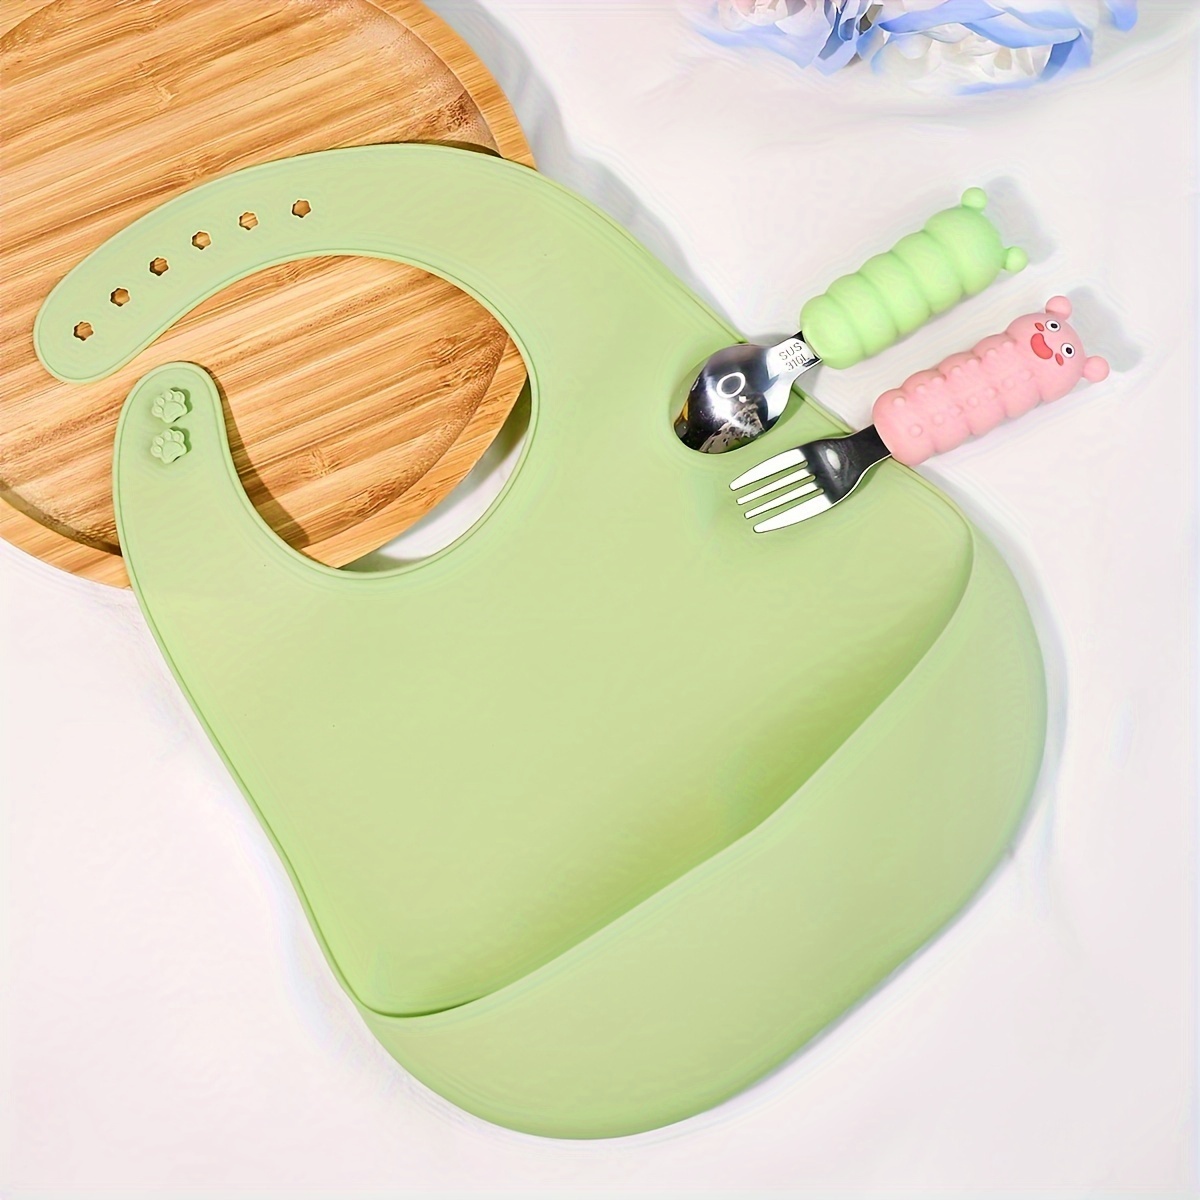 

Silicone Bib, Adjustable And Waterproof Feeding Bib With Food Catcher Pocket, Easy To Clean, Soft And Durable